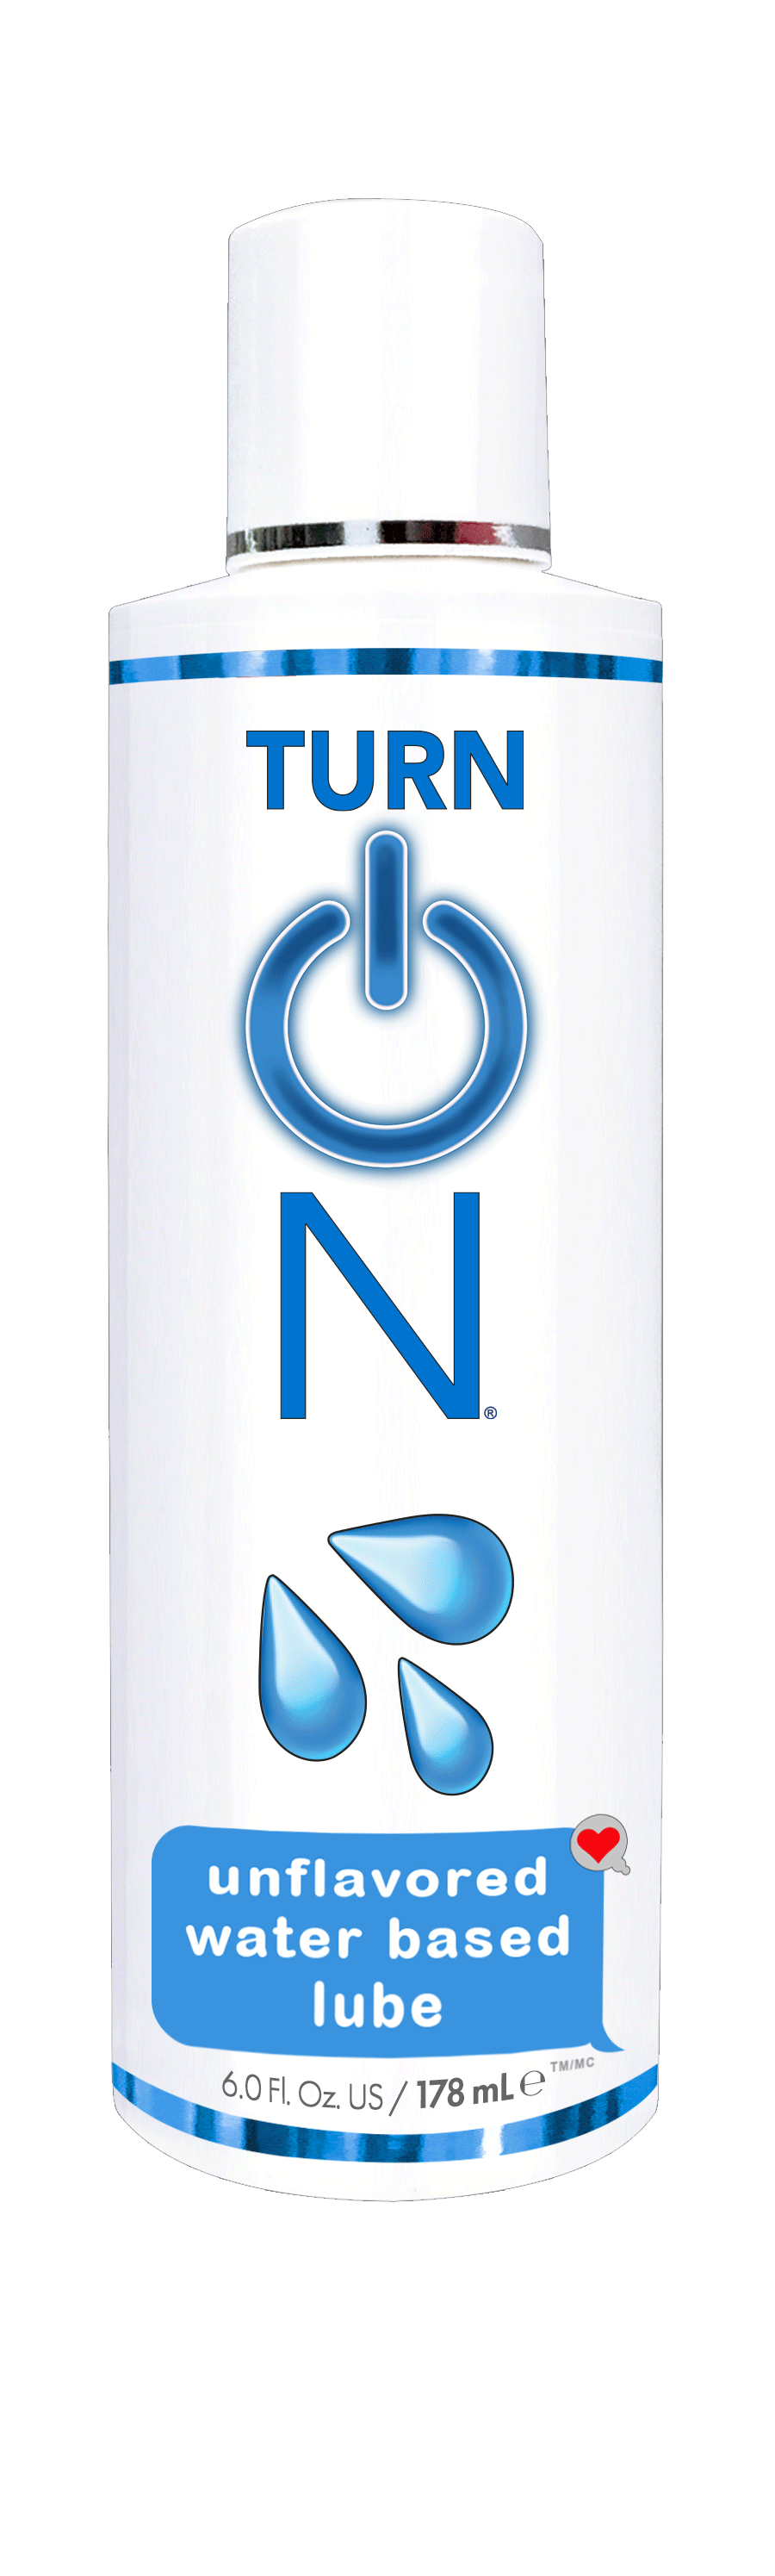 Turn on Unflavored Water Based Lube